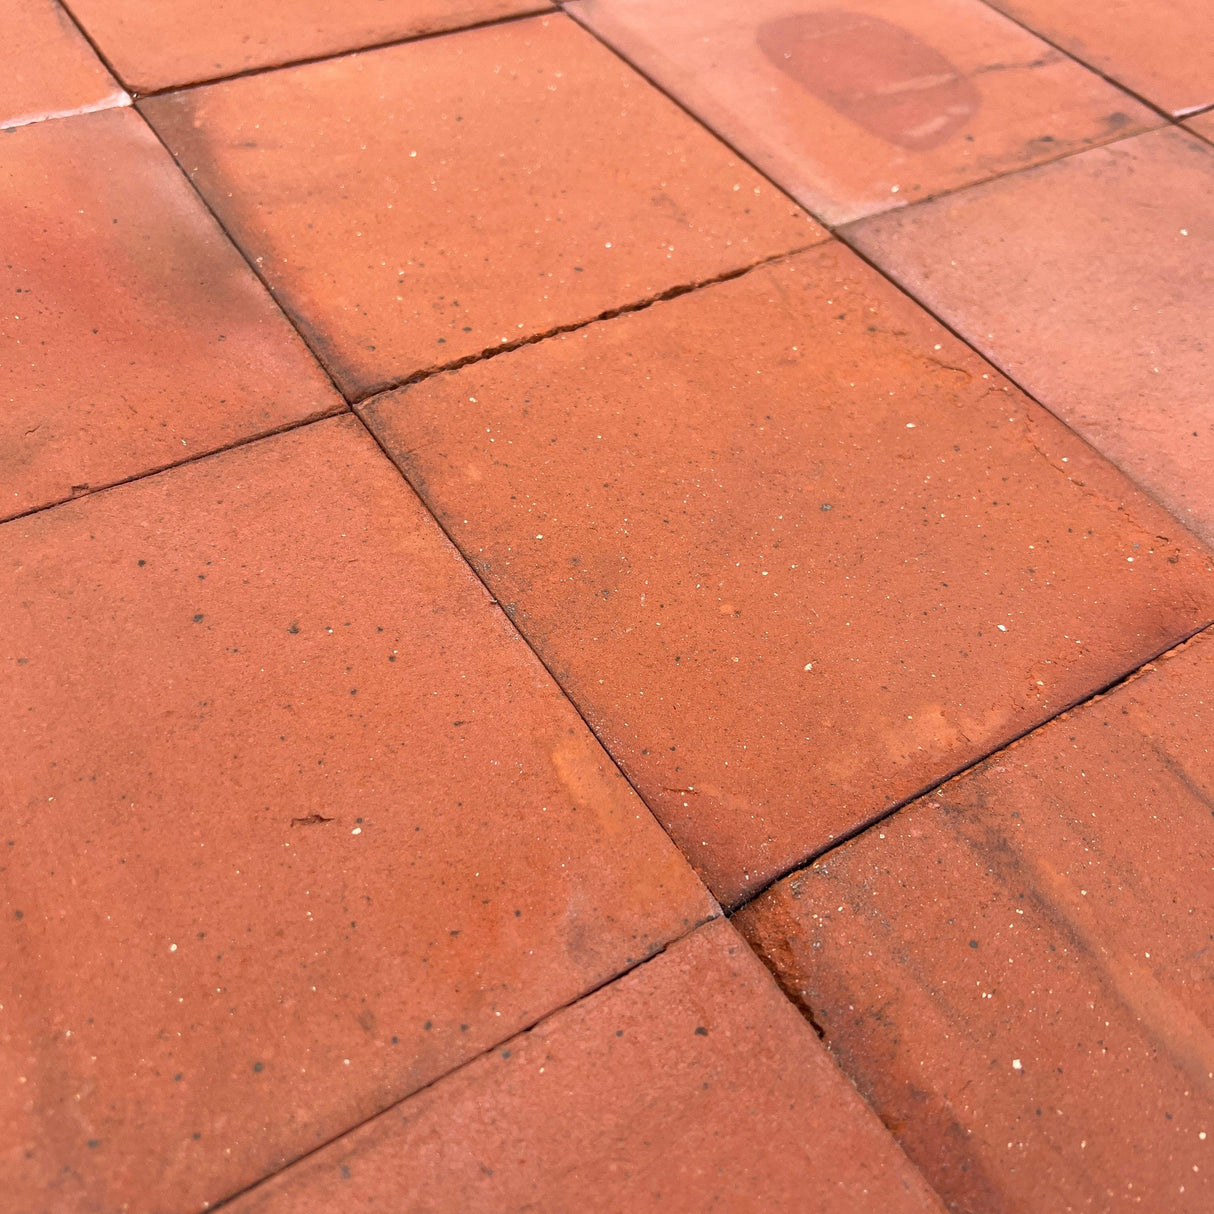 New Red Quarry Tiles - 6” x 6” - Reclaimed Brick Company